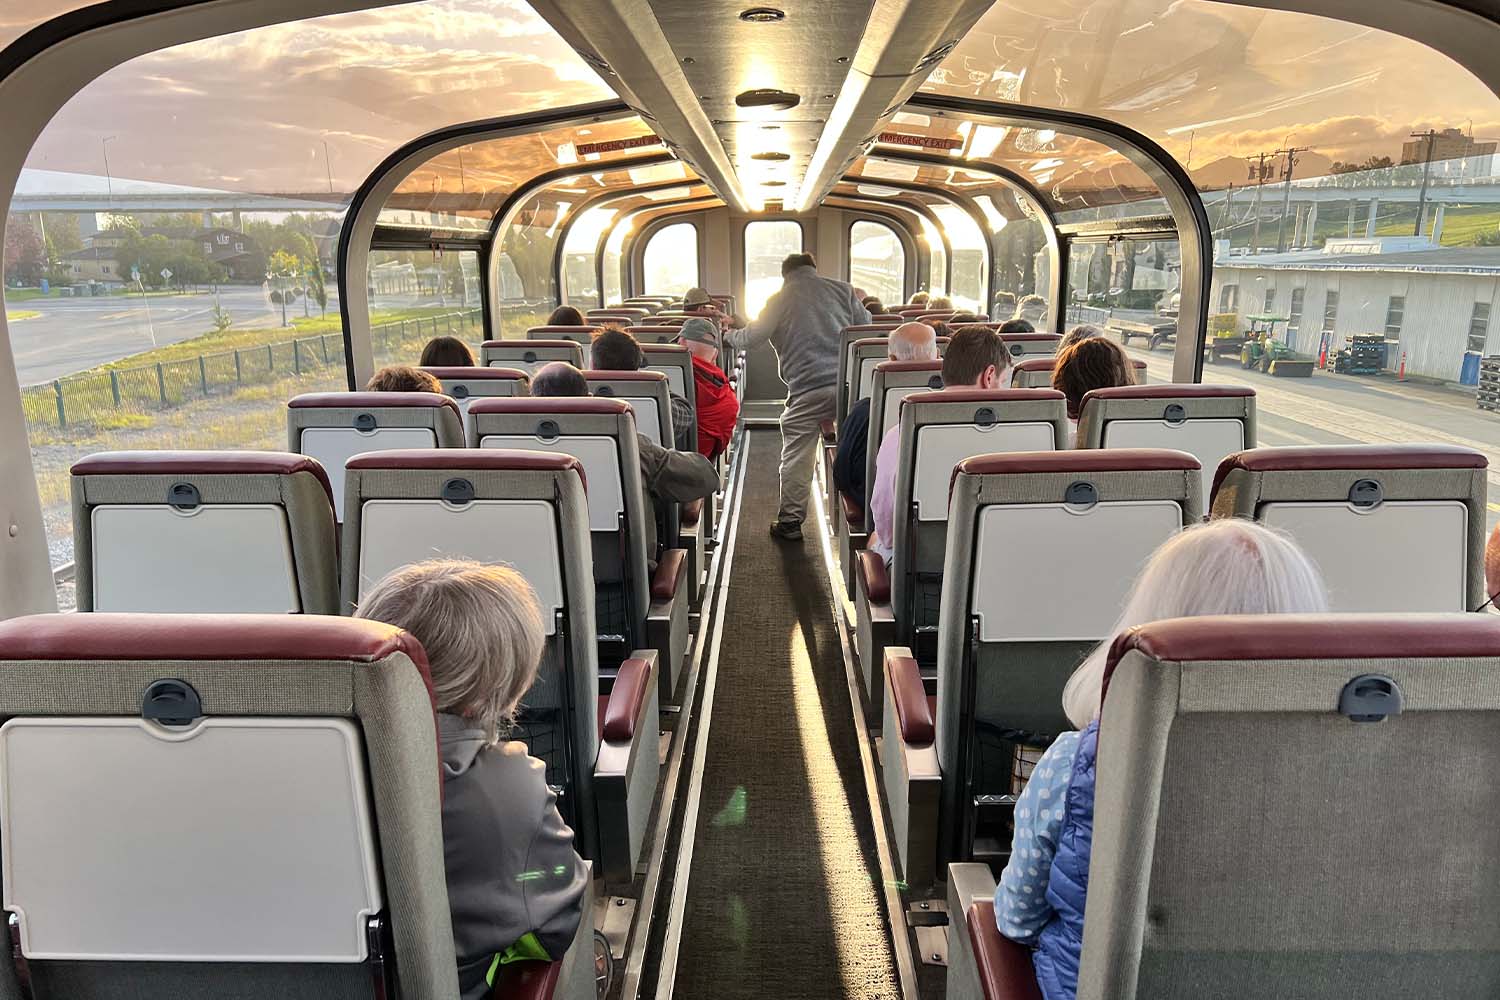 The railcars feature large curved glass windows that run the full length of the car, allowing 360 degree viewing